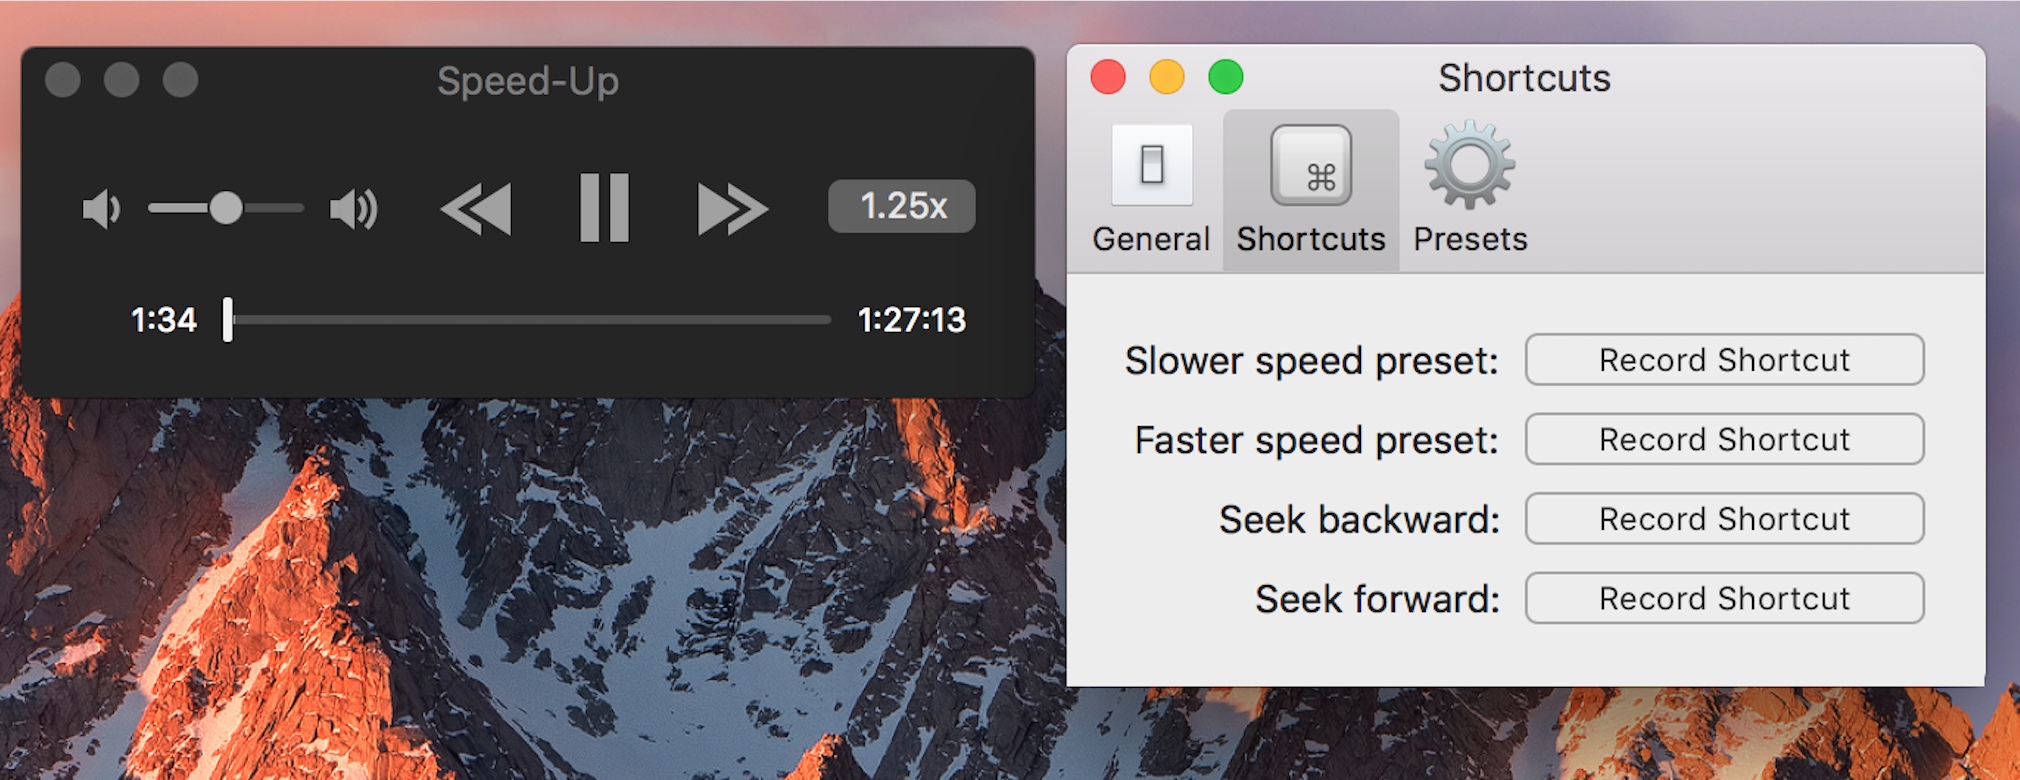 Mac App To Increase Spped Of Recordings